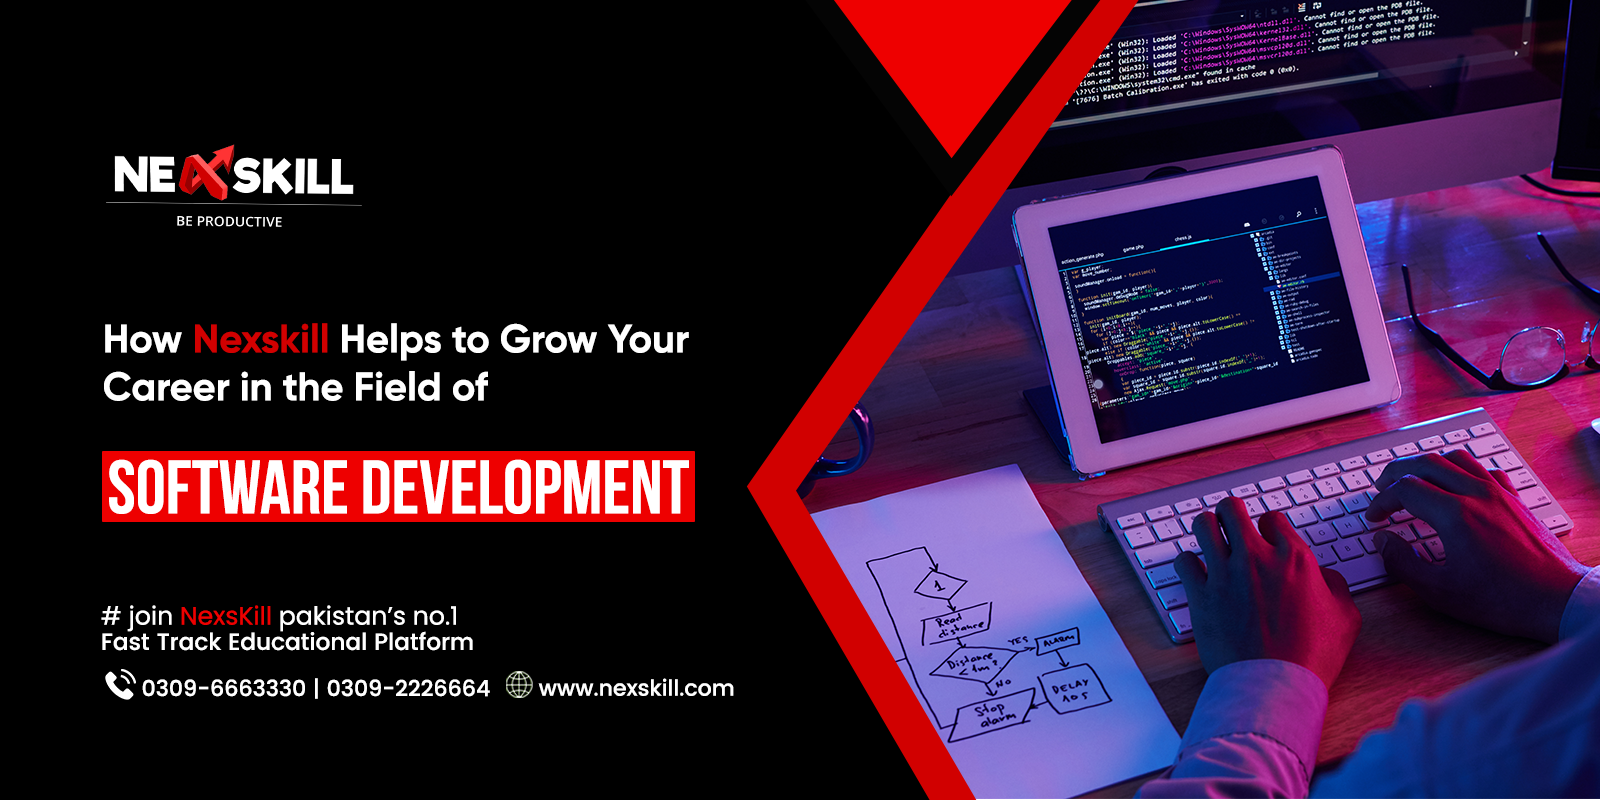 How Nexskill Helps to Grow Your Career in the Field of Software Development